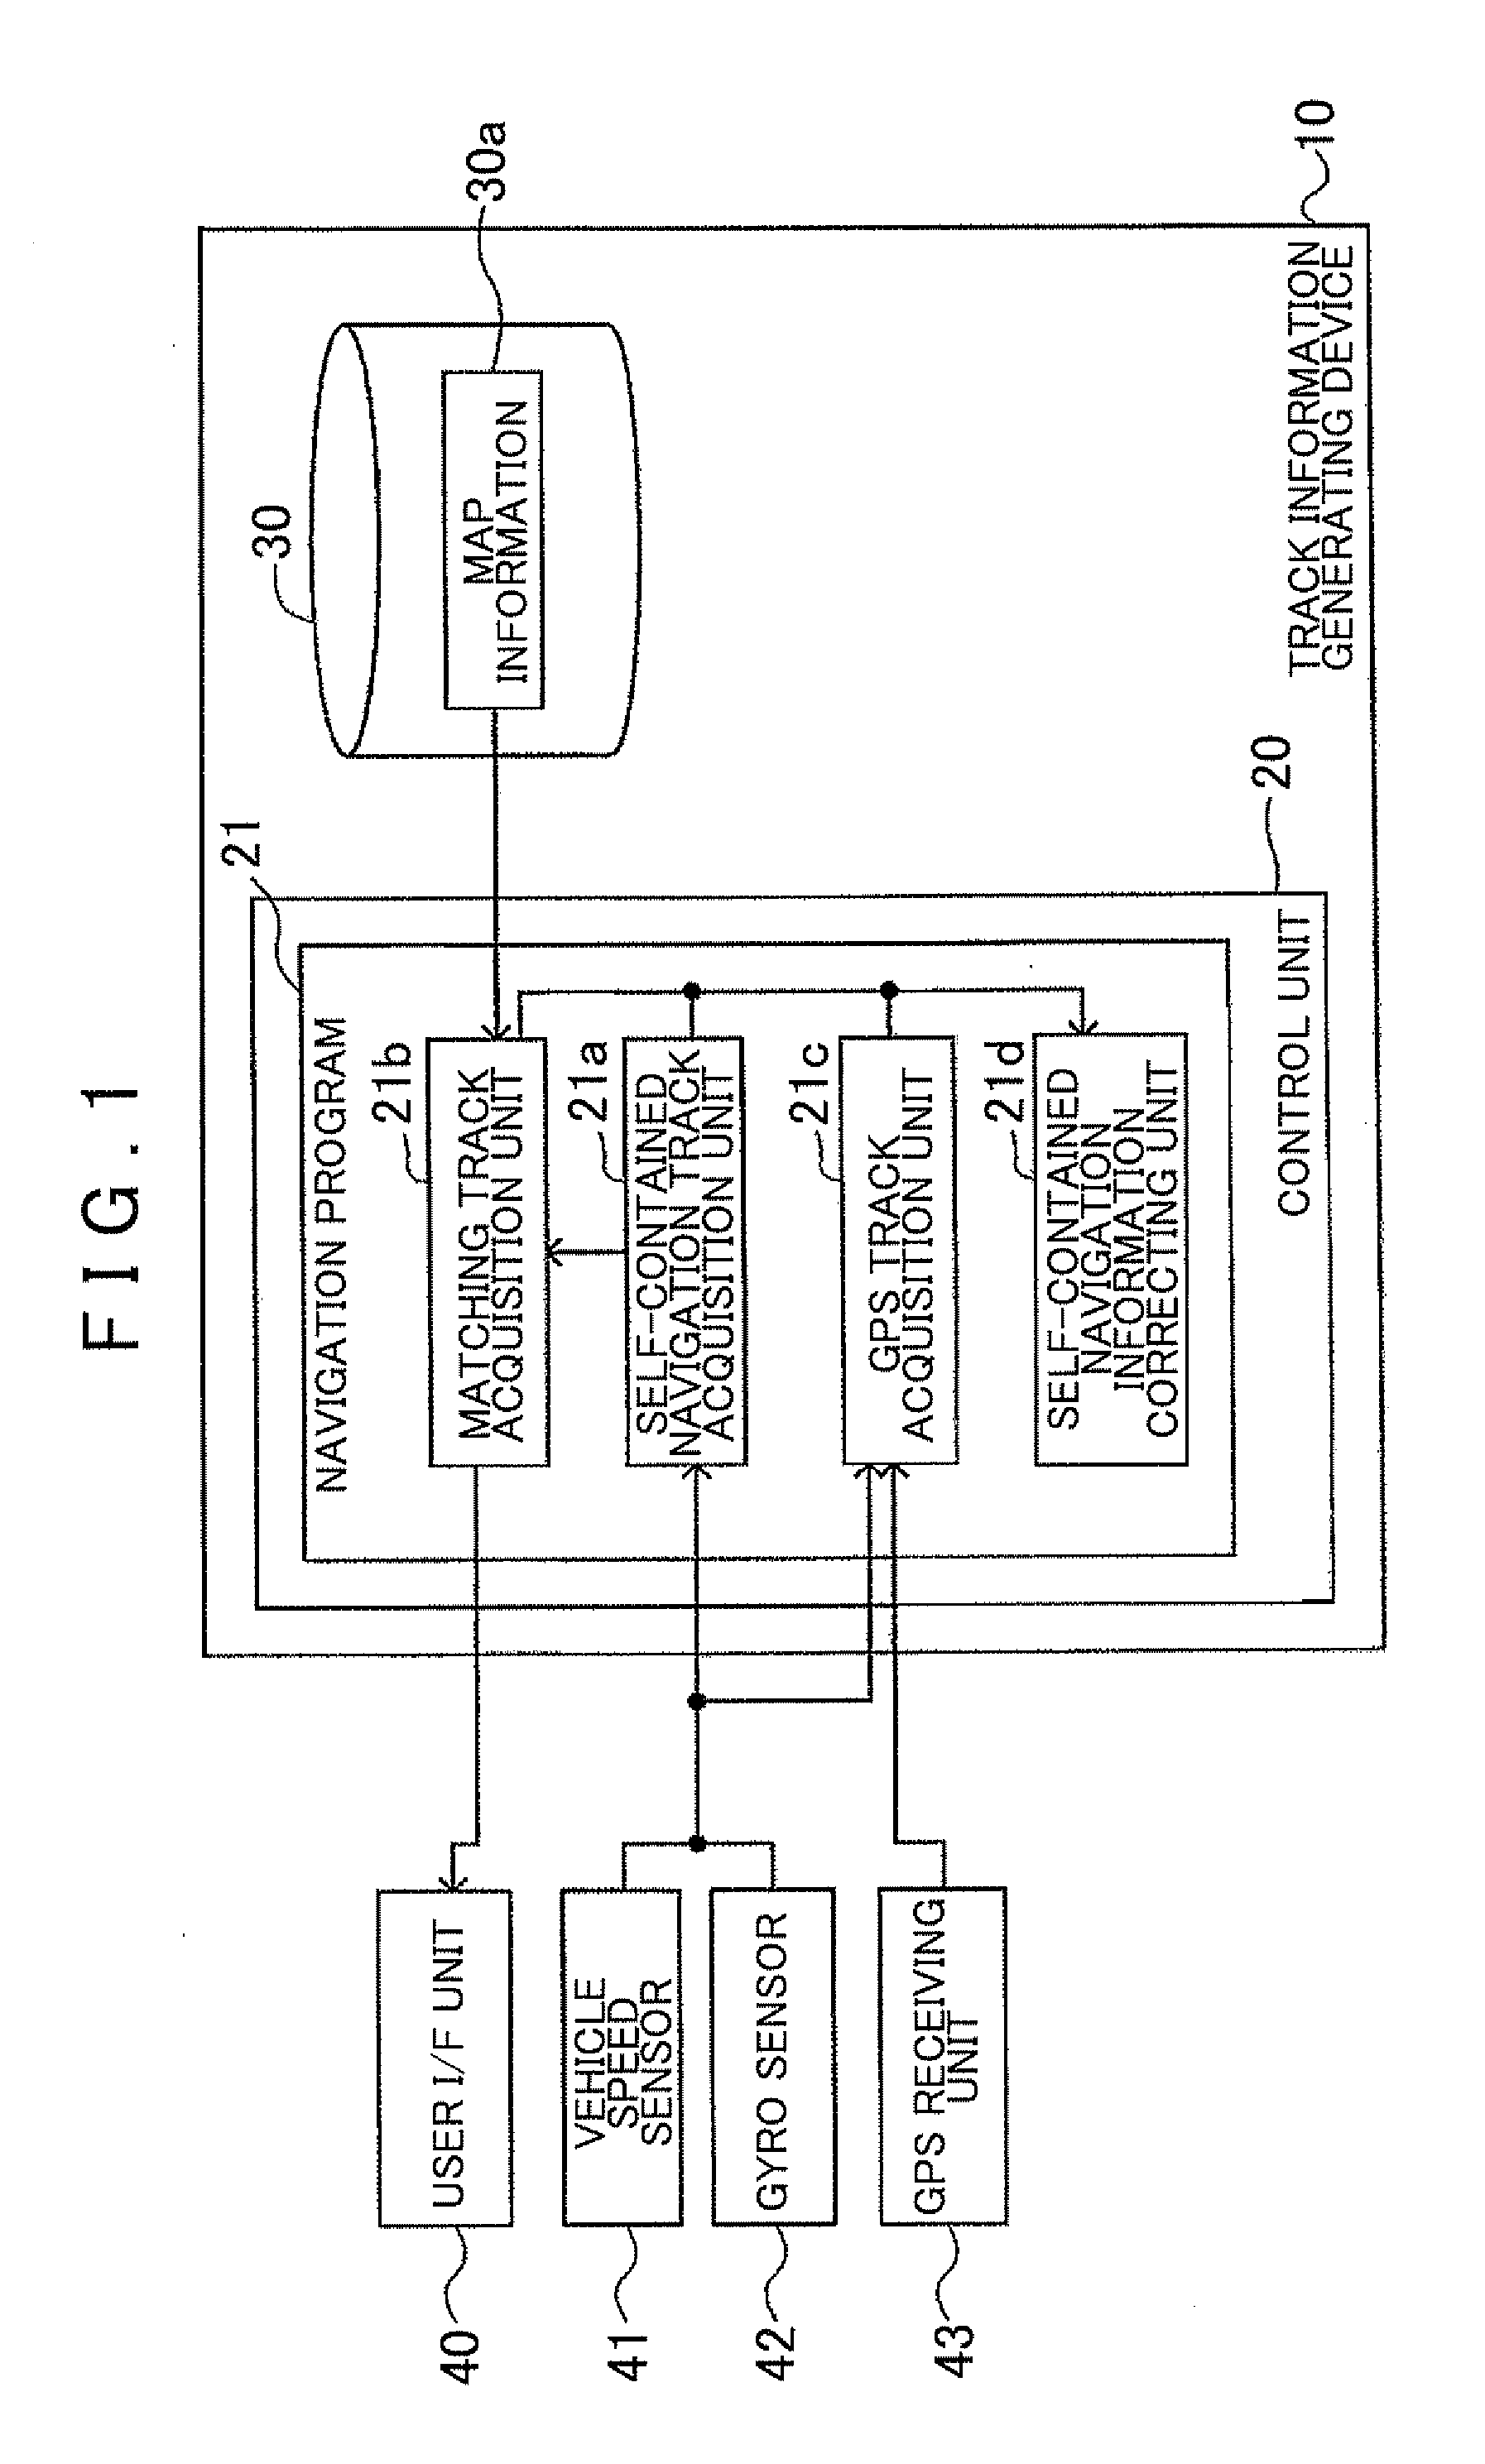 Track information generating device, track information generating method, and computer-readable storage medium